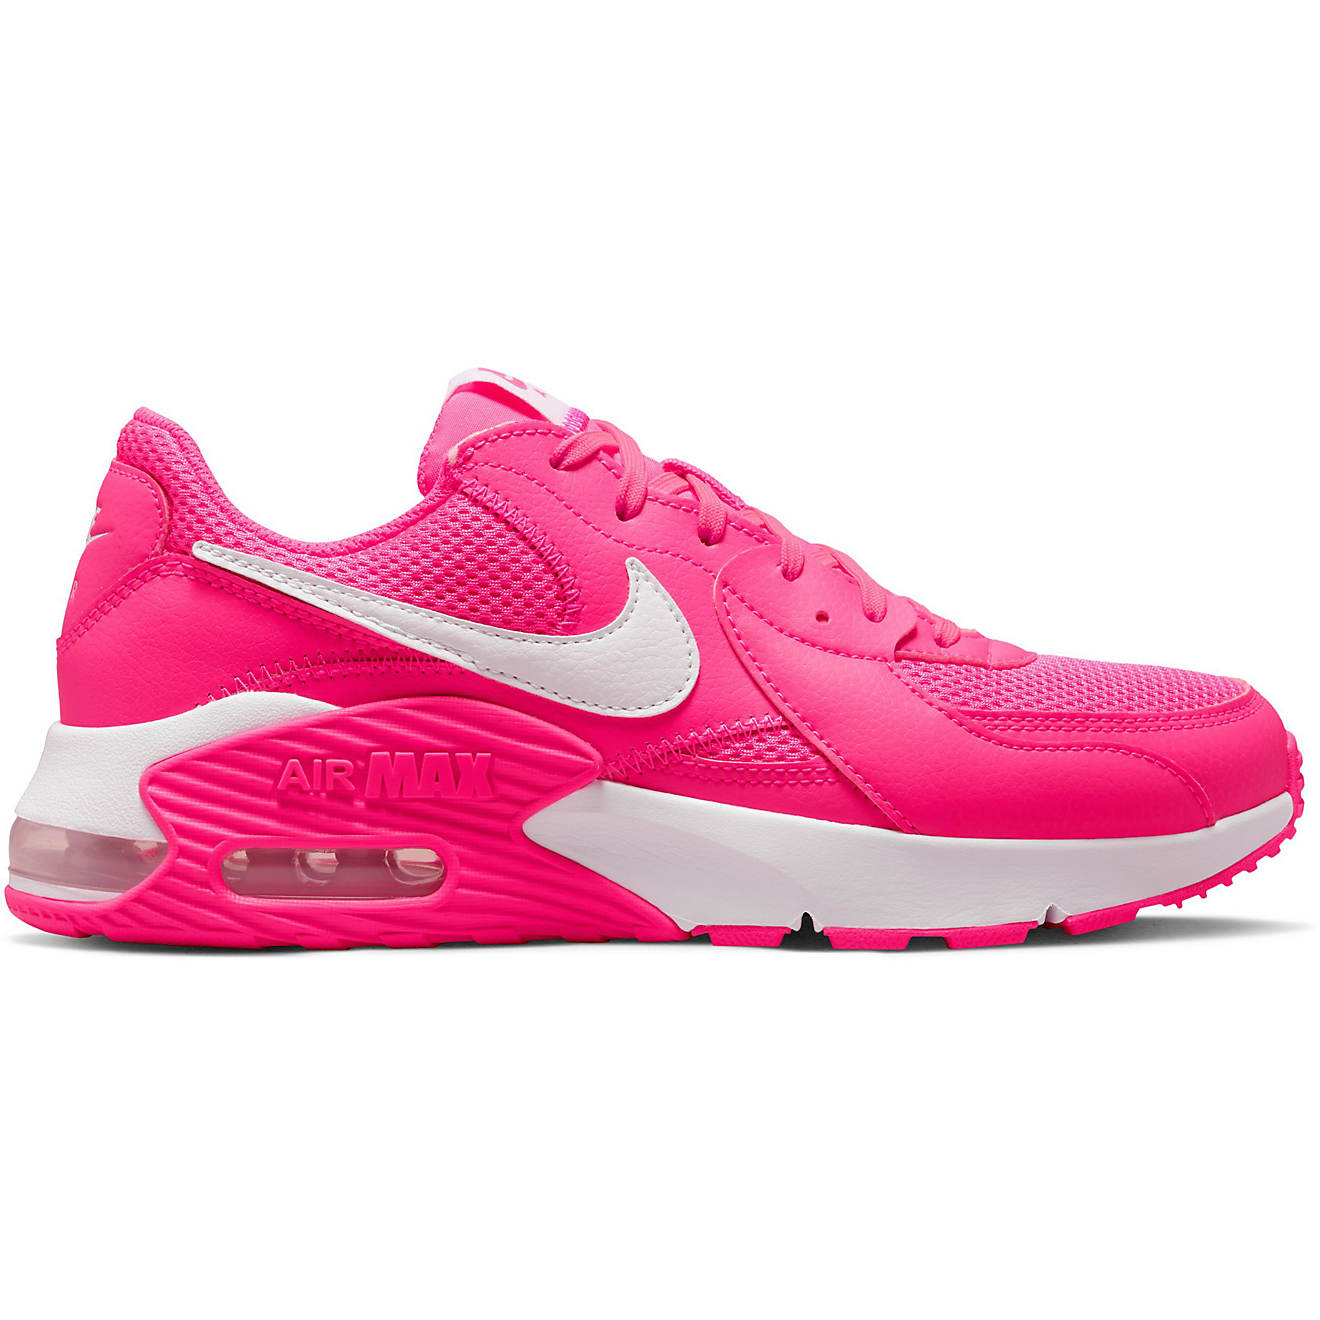 Junior Branch come across Nike Women's Air Max Excee Shoes | Academy